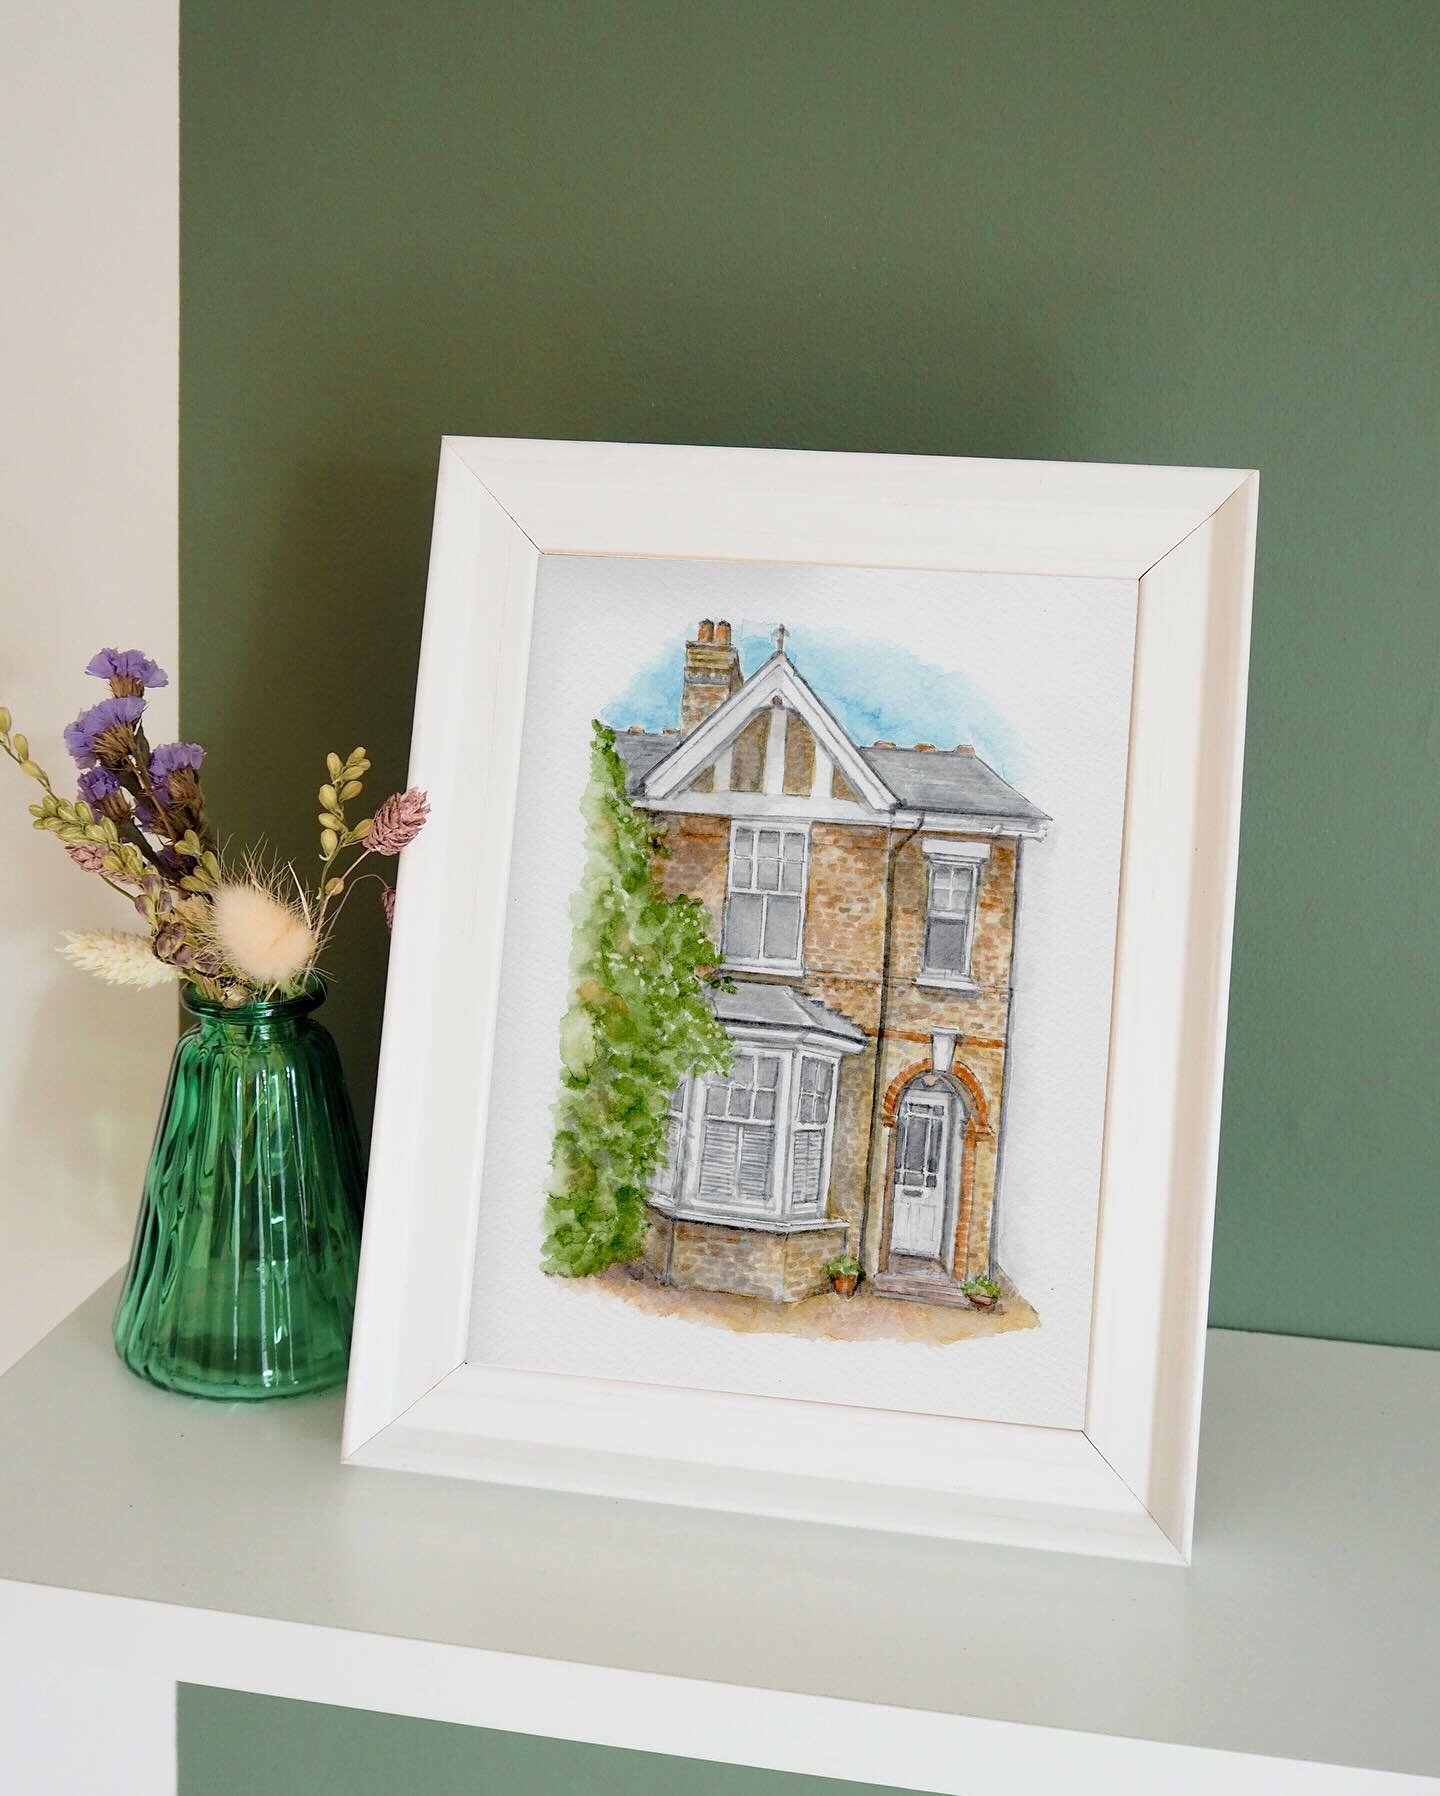 This is no April fools joke - our April custom slots are now OPEN!

This is your chance to secure a print for a new wedding venue artwork, or an original watercolour house portrait just like this one 🎨 

As always, slots are limited. Check out our s